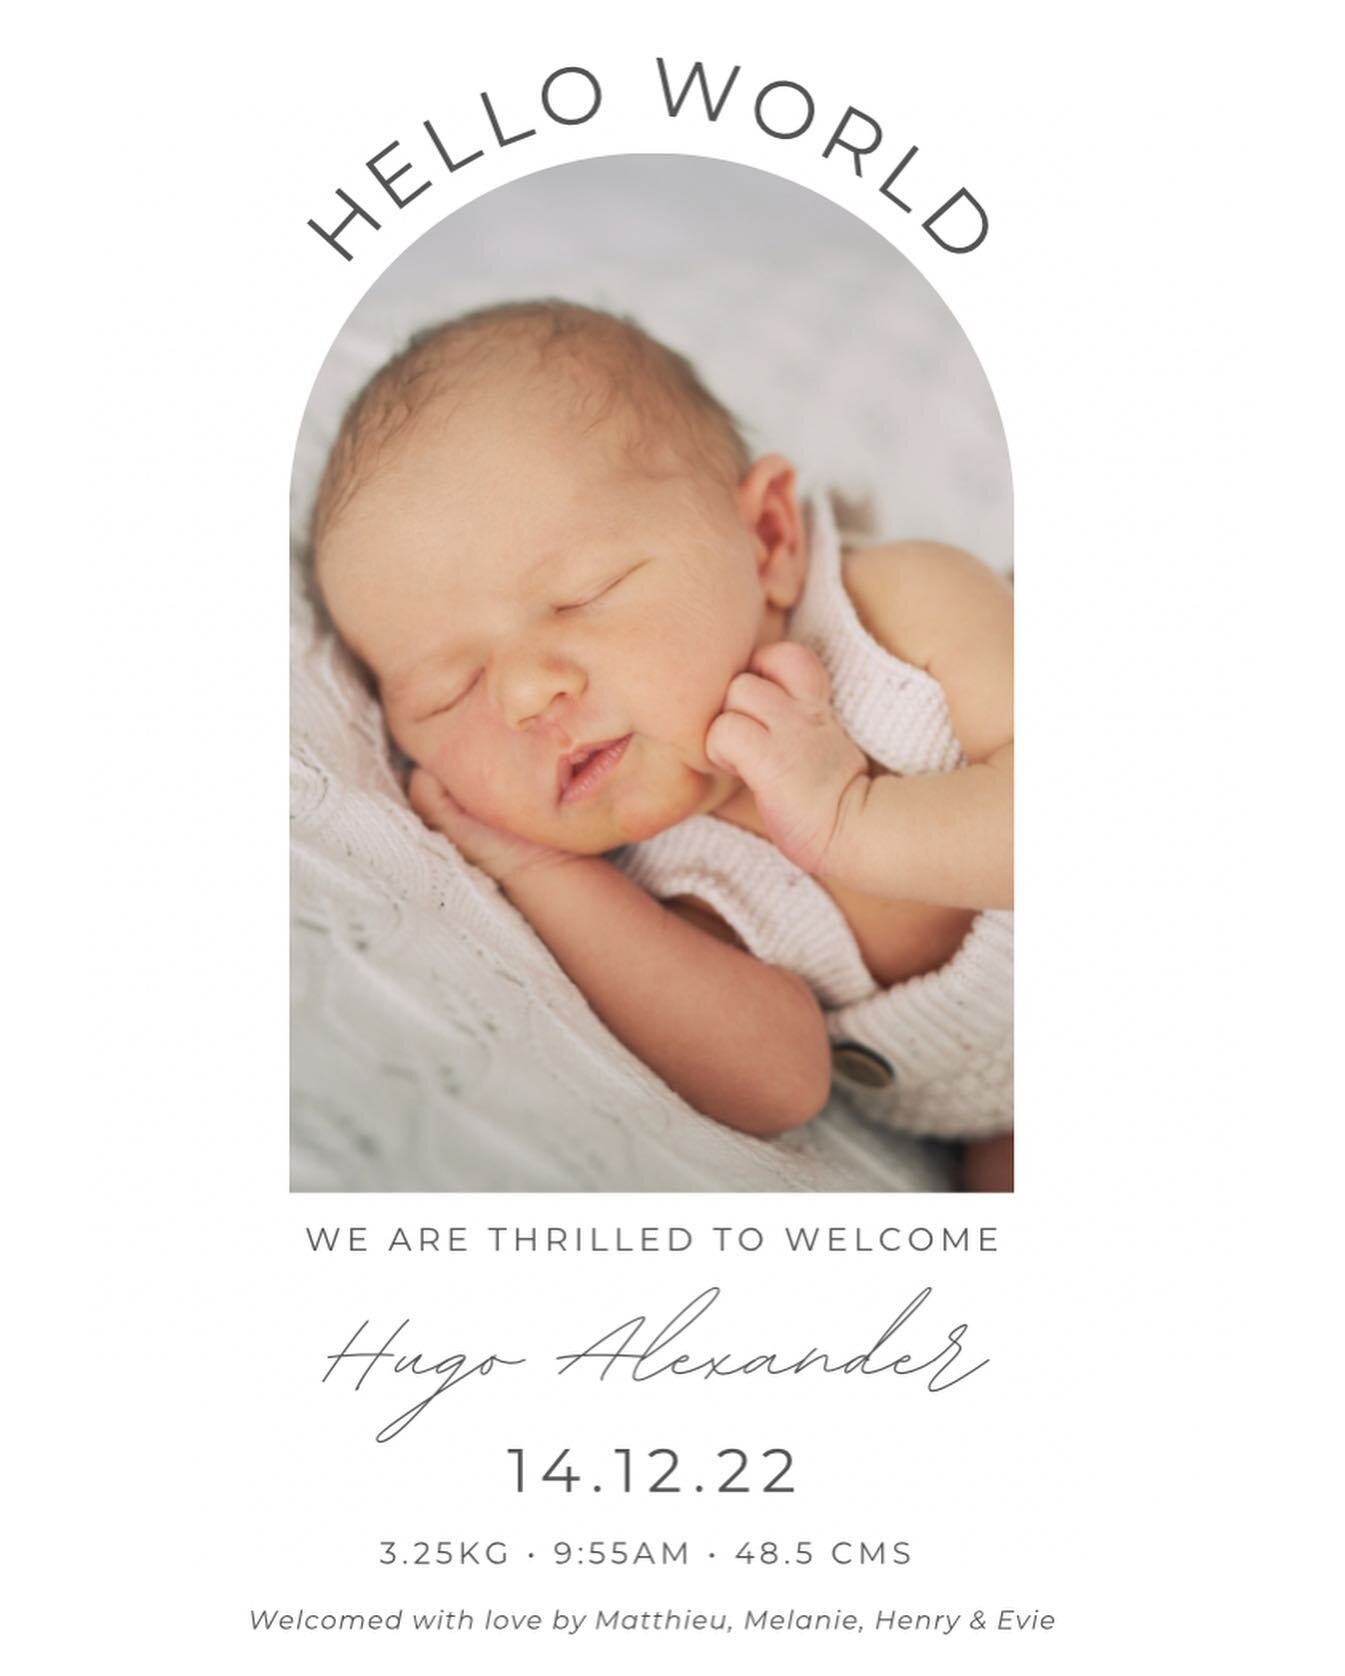 Just over a week ago we welcomed little Hugo Alexander to our family💙🥰 Thank you all for your love and support so far as we have adjusted to family of 5! Hugo has fit so perfectly into our family, we are beyond blessed 🥹💫